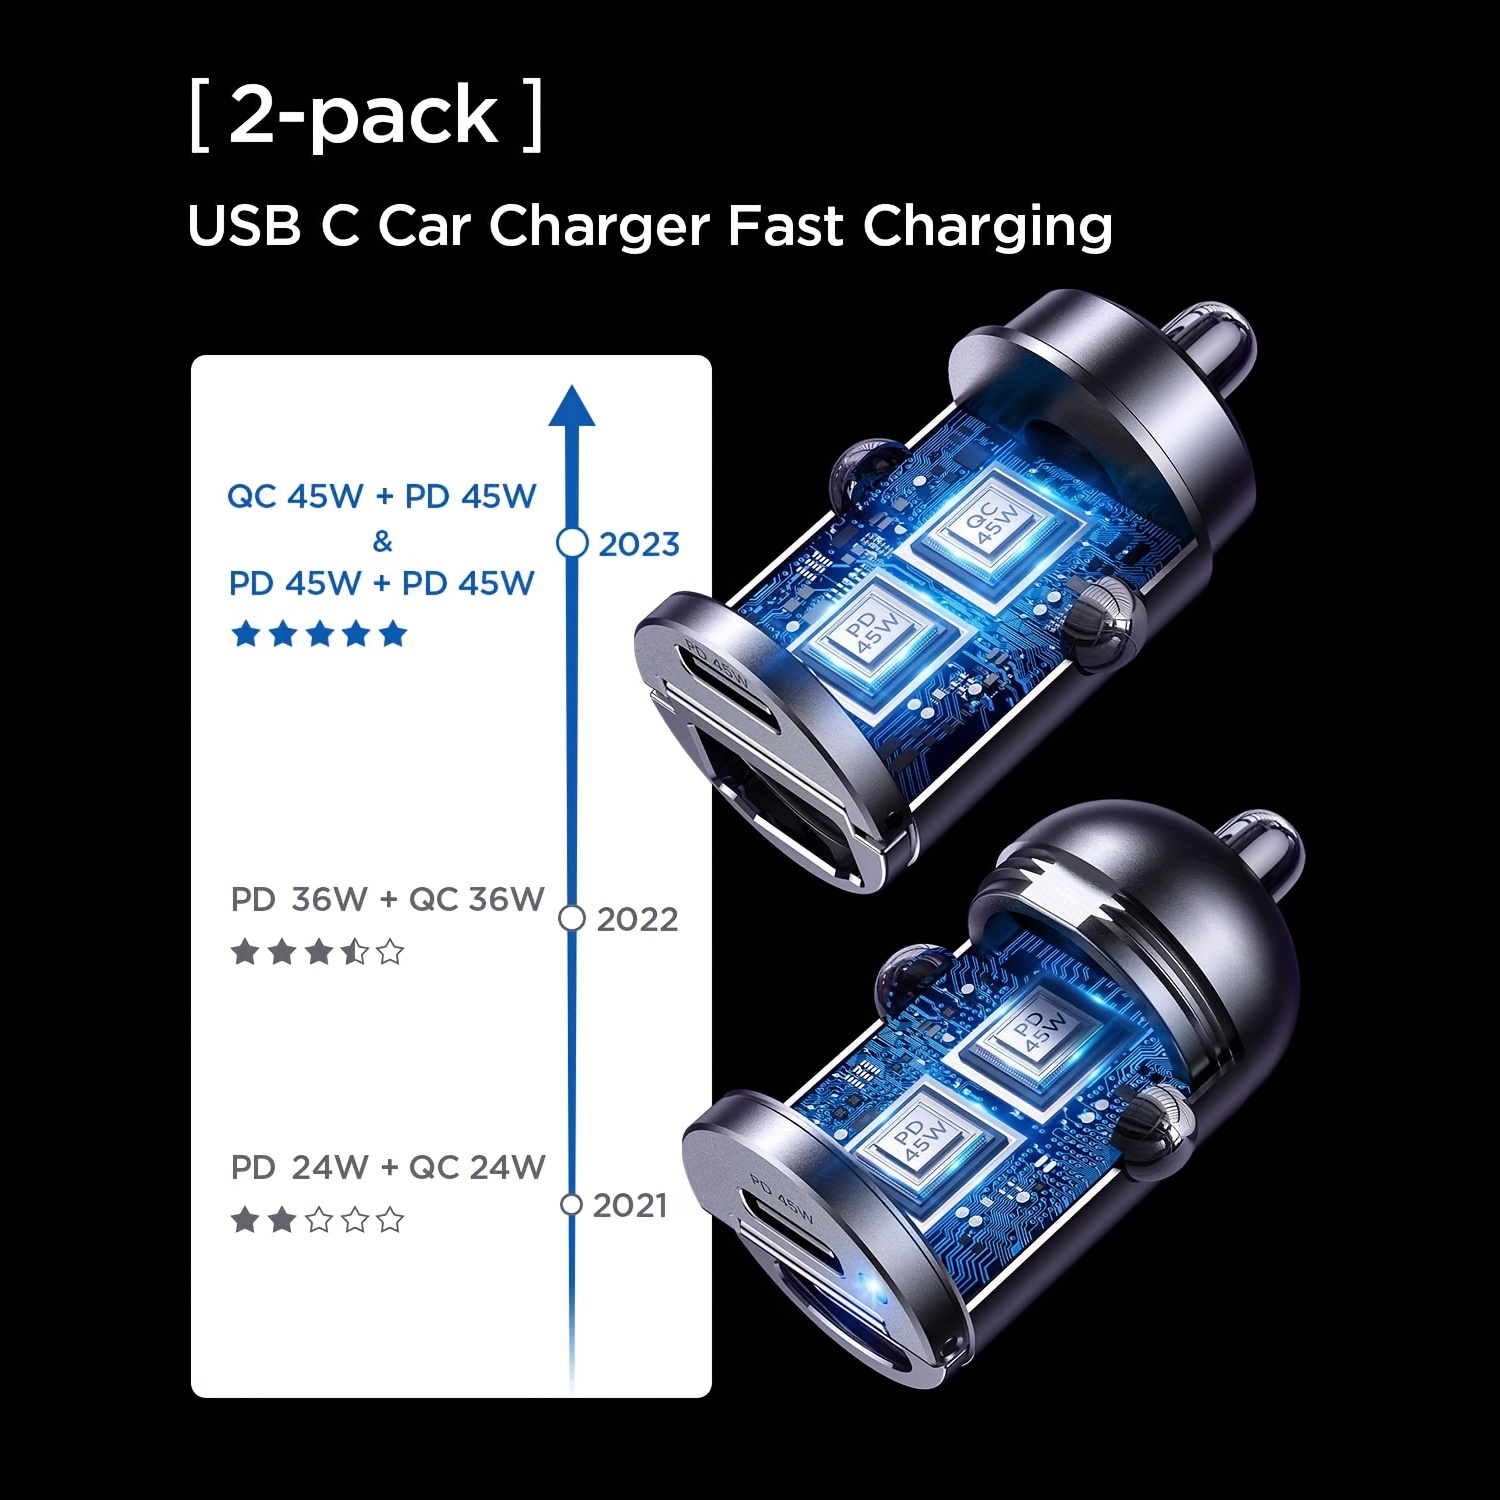 Car Charger,AILKIN 2Pack 3.4A Dual Port USB Car Charger Adaptor